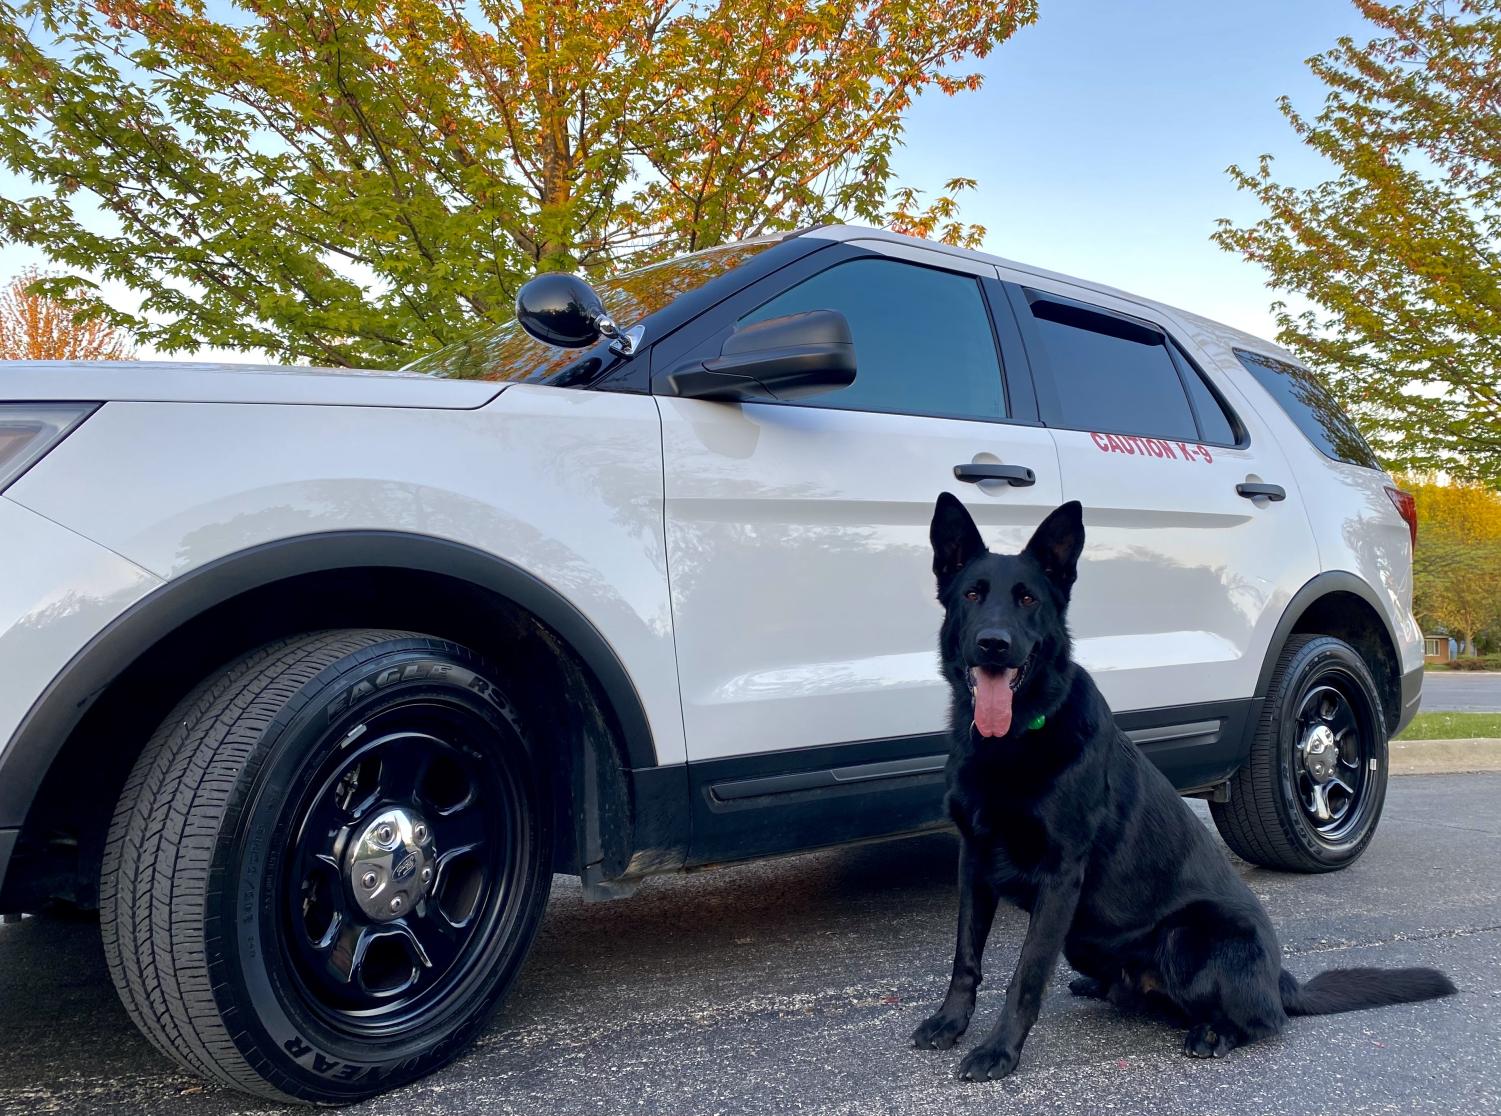 A black German Shepherd sits on the street in front of a white police car.